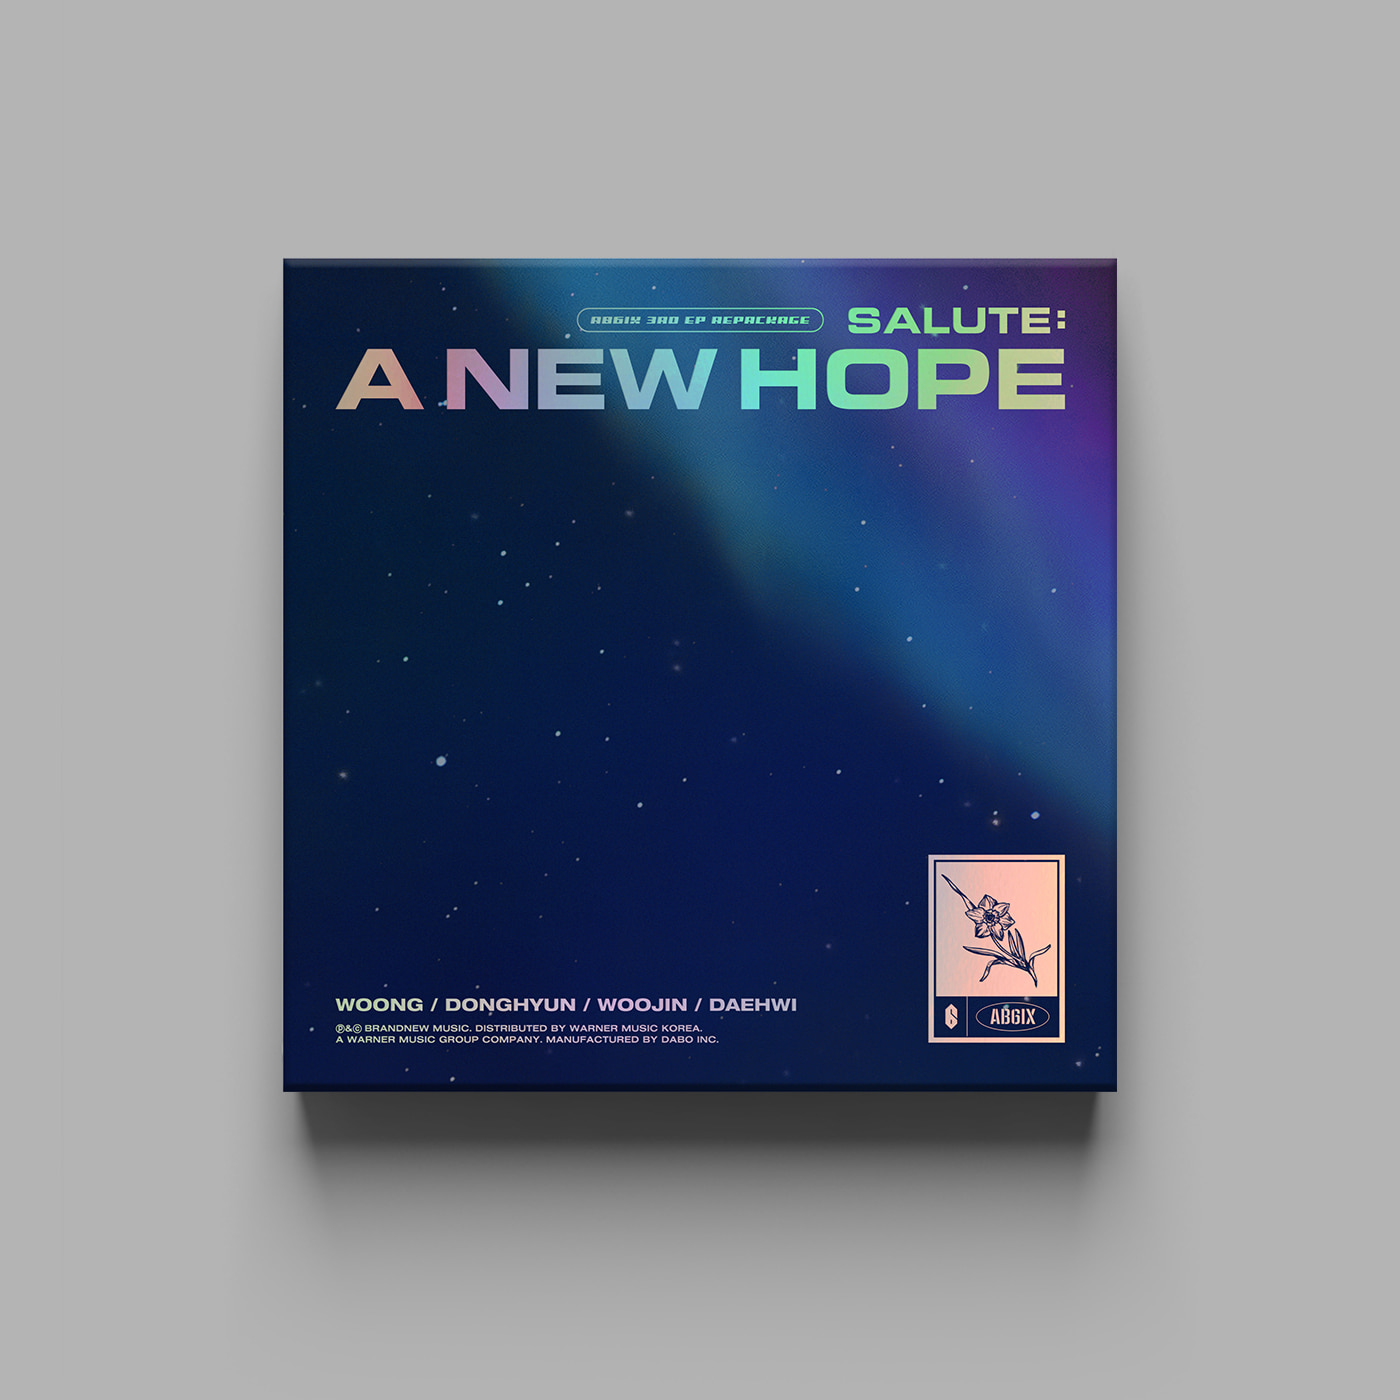 AB6IX - 3RD EP REPACKAGE [SALUTE : A NEW HOPE] (NEW Ver.)케이팝스토어(kpop store)